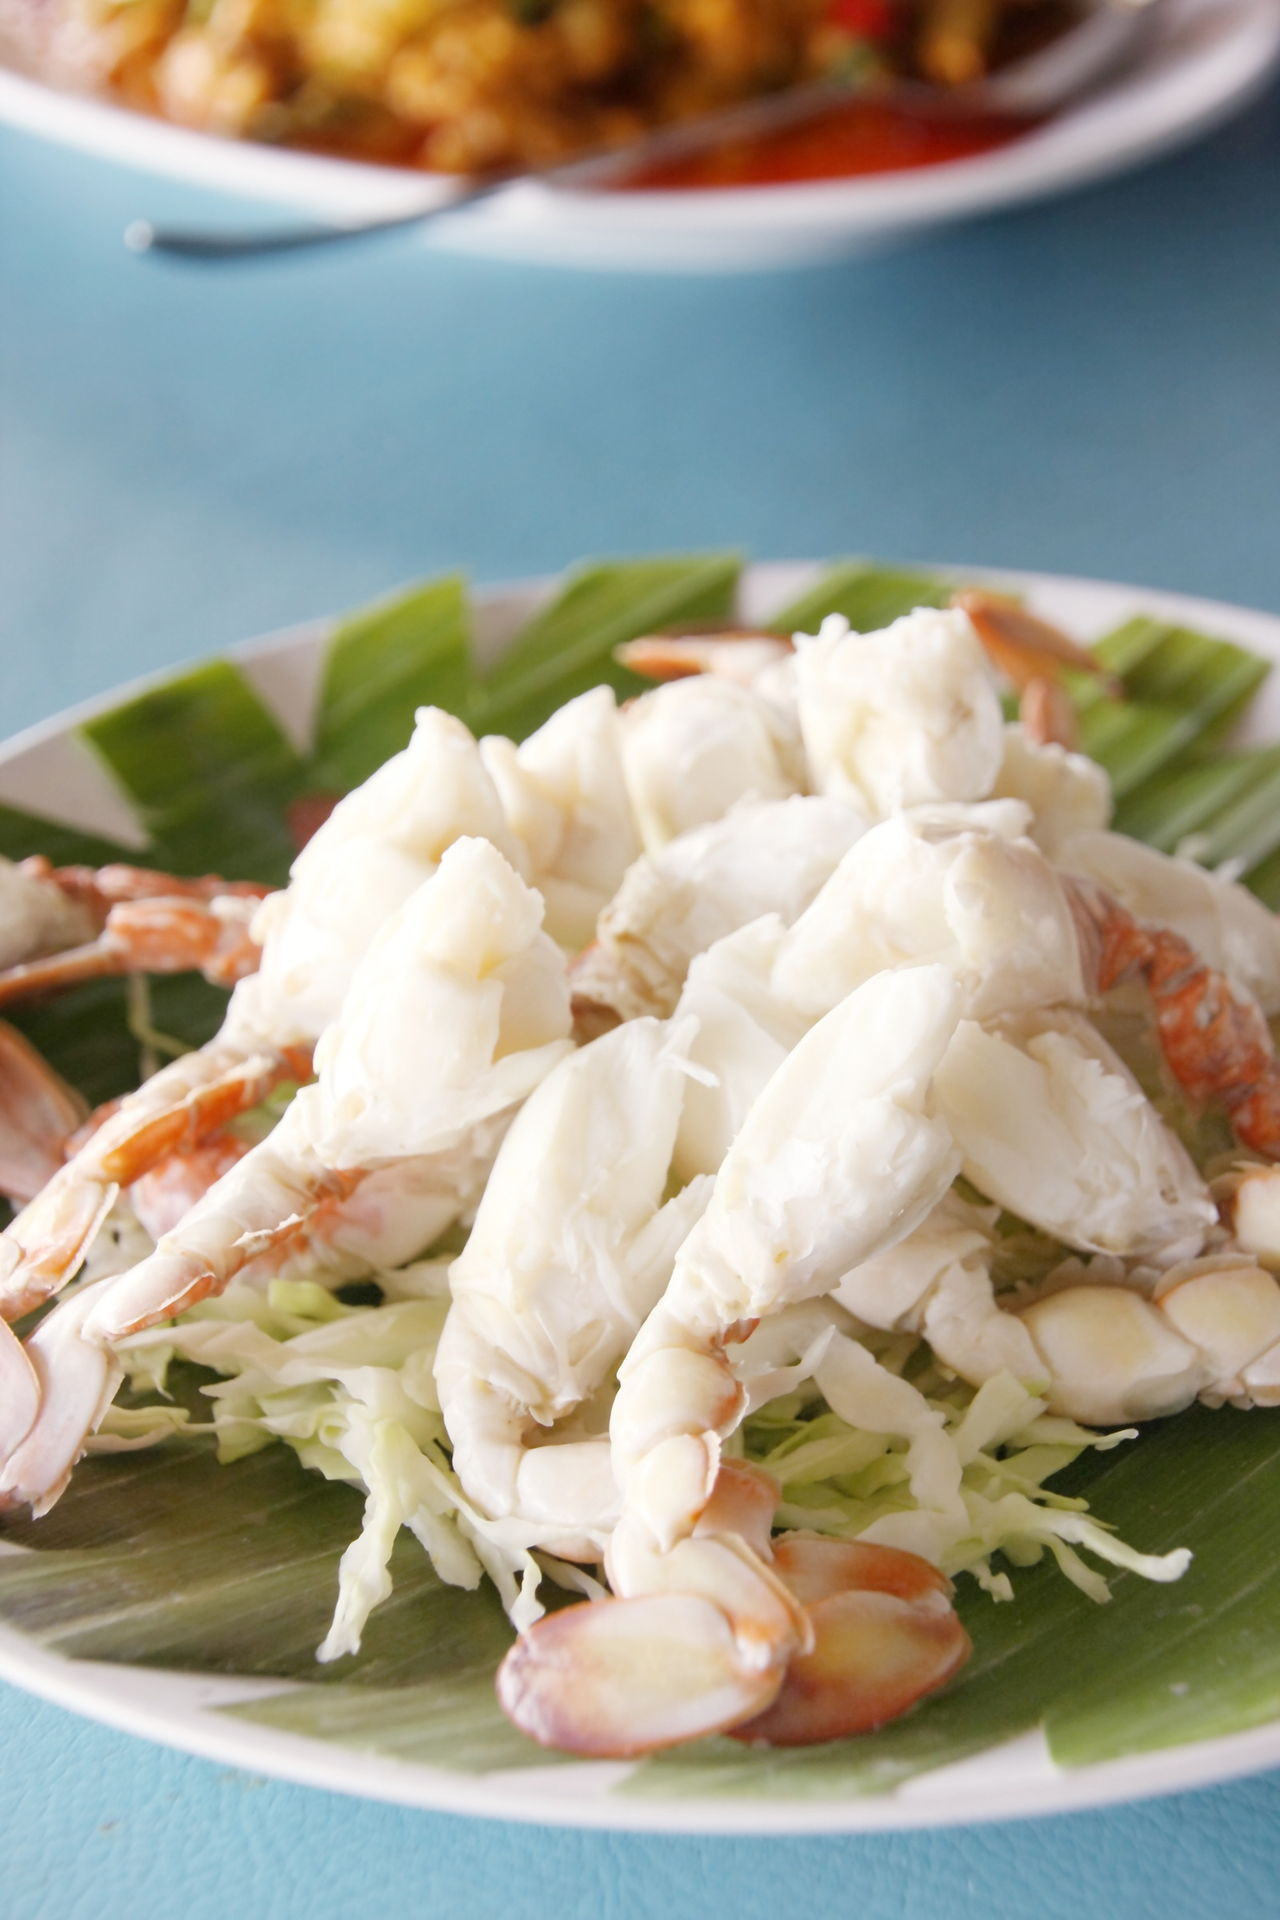 Side Dishes For Crab Legs
 12 Impeccable and Amazing Sides to Serve With Crab Legs